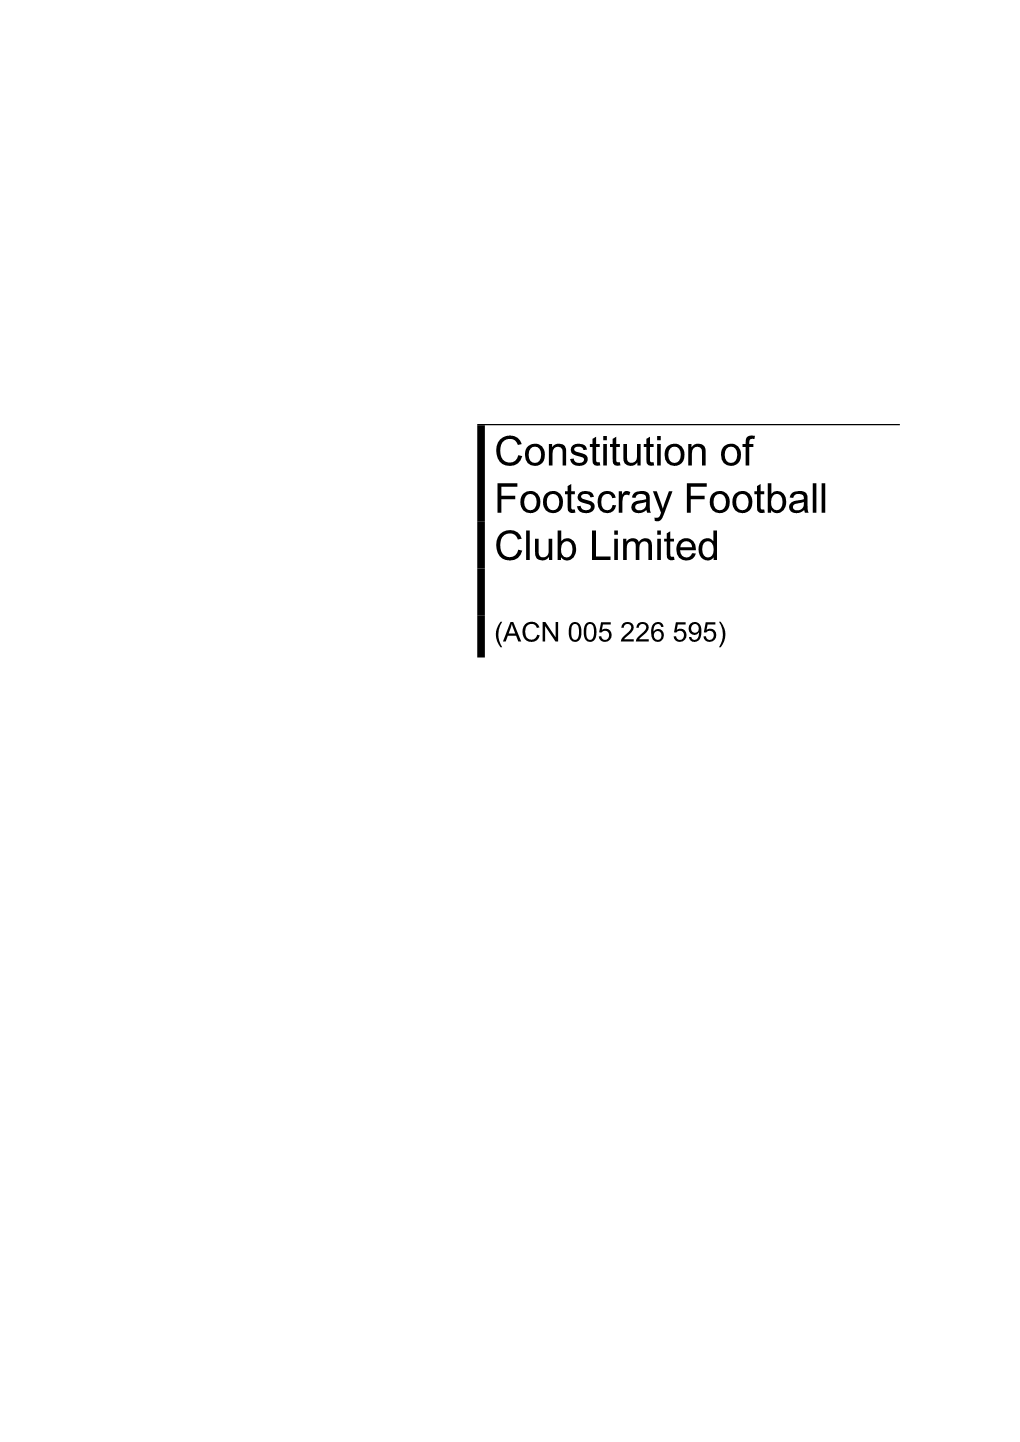 Constitution of Footscray Football Club Limited